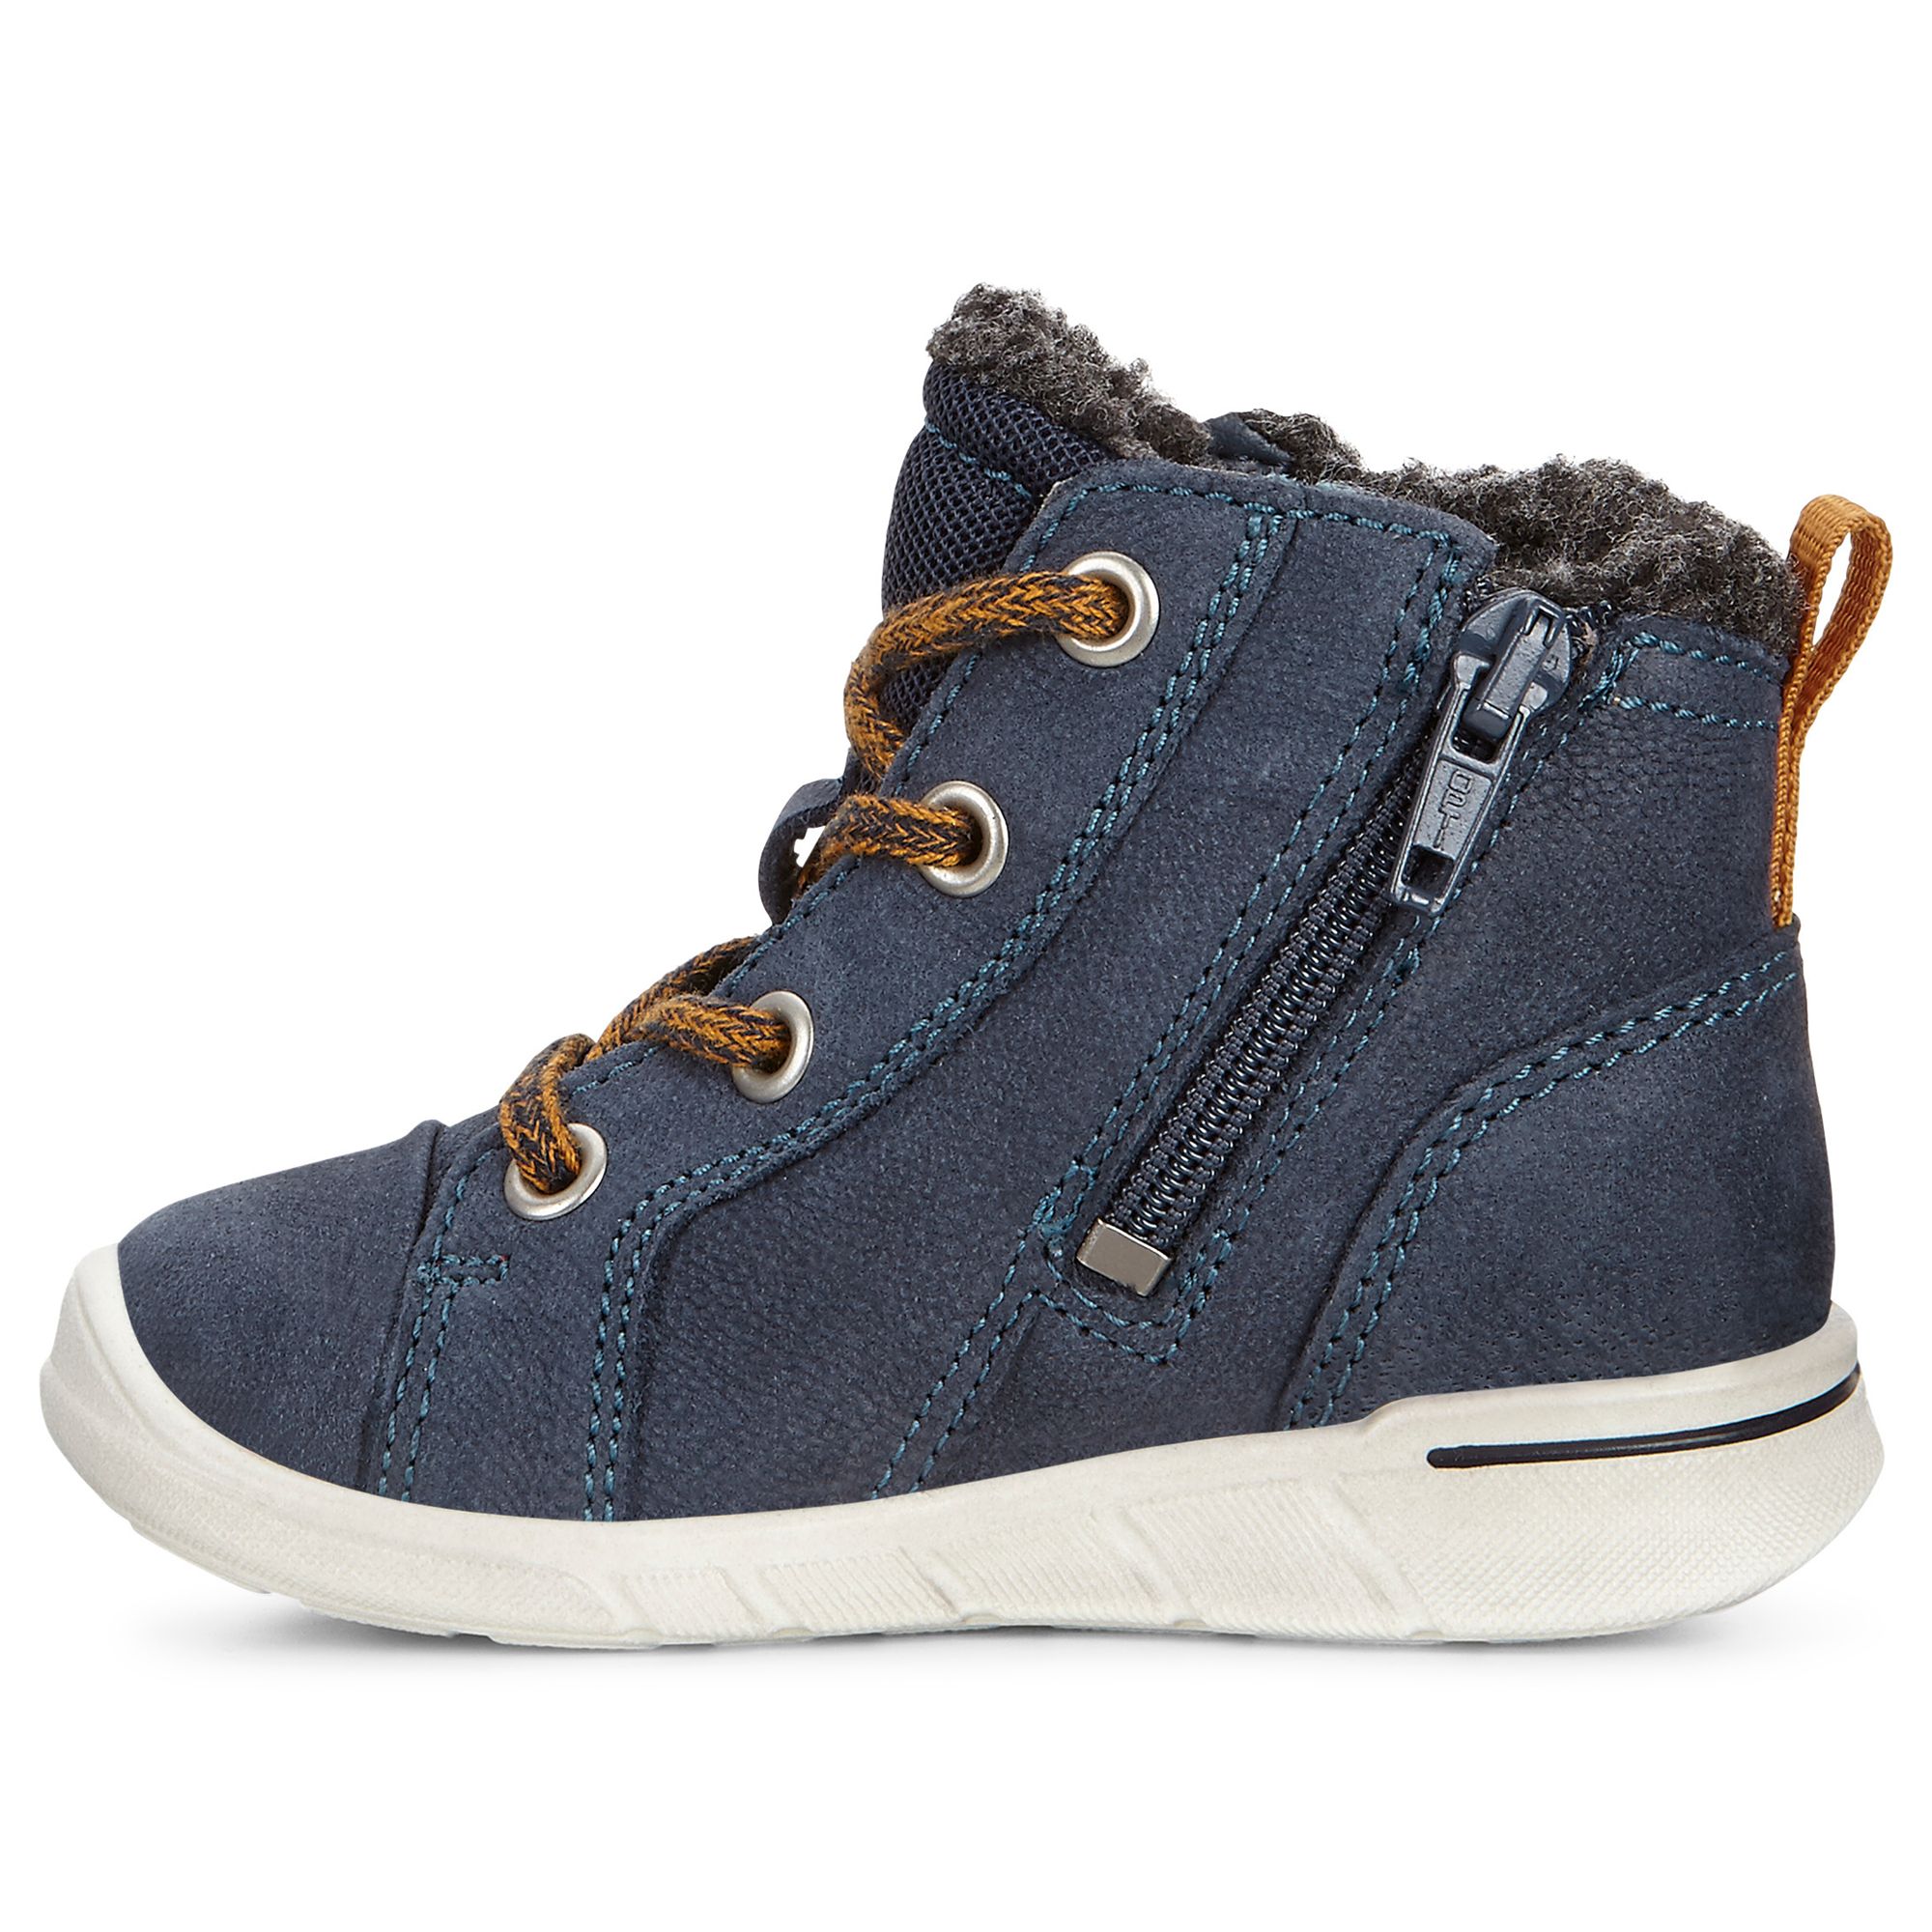 Buy ECCO Kids' First Lace-Up Trainers Online at johnlewis.com